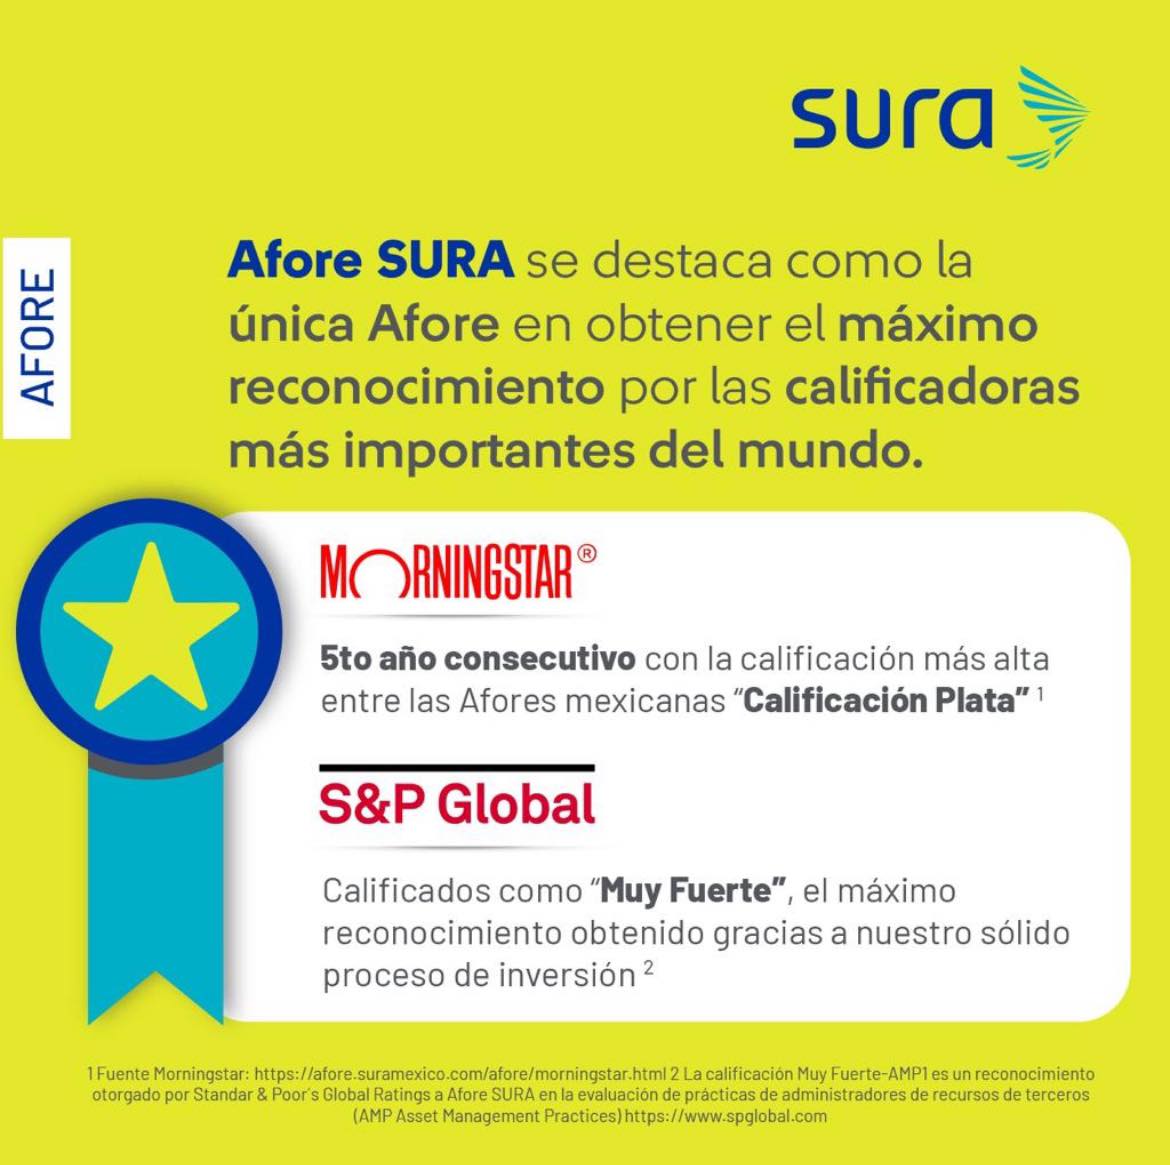 Afore SURA is recognized by Morningstar with the Silver Rating for the fifth consecutive time, the highest awarded this year